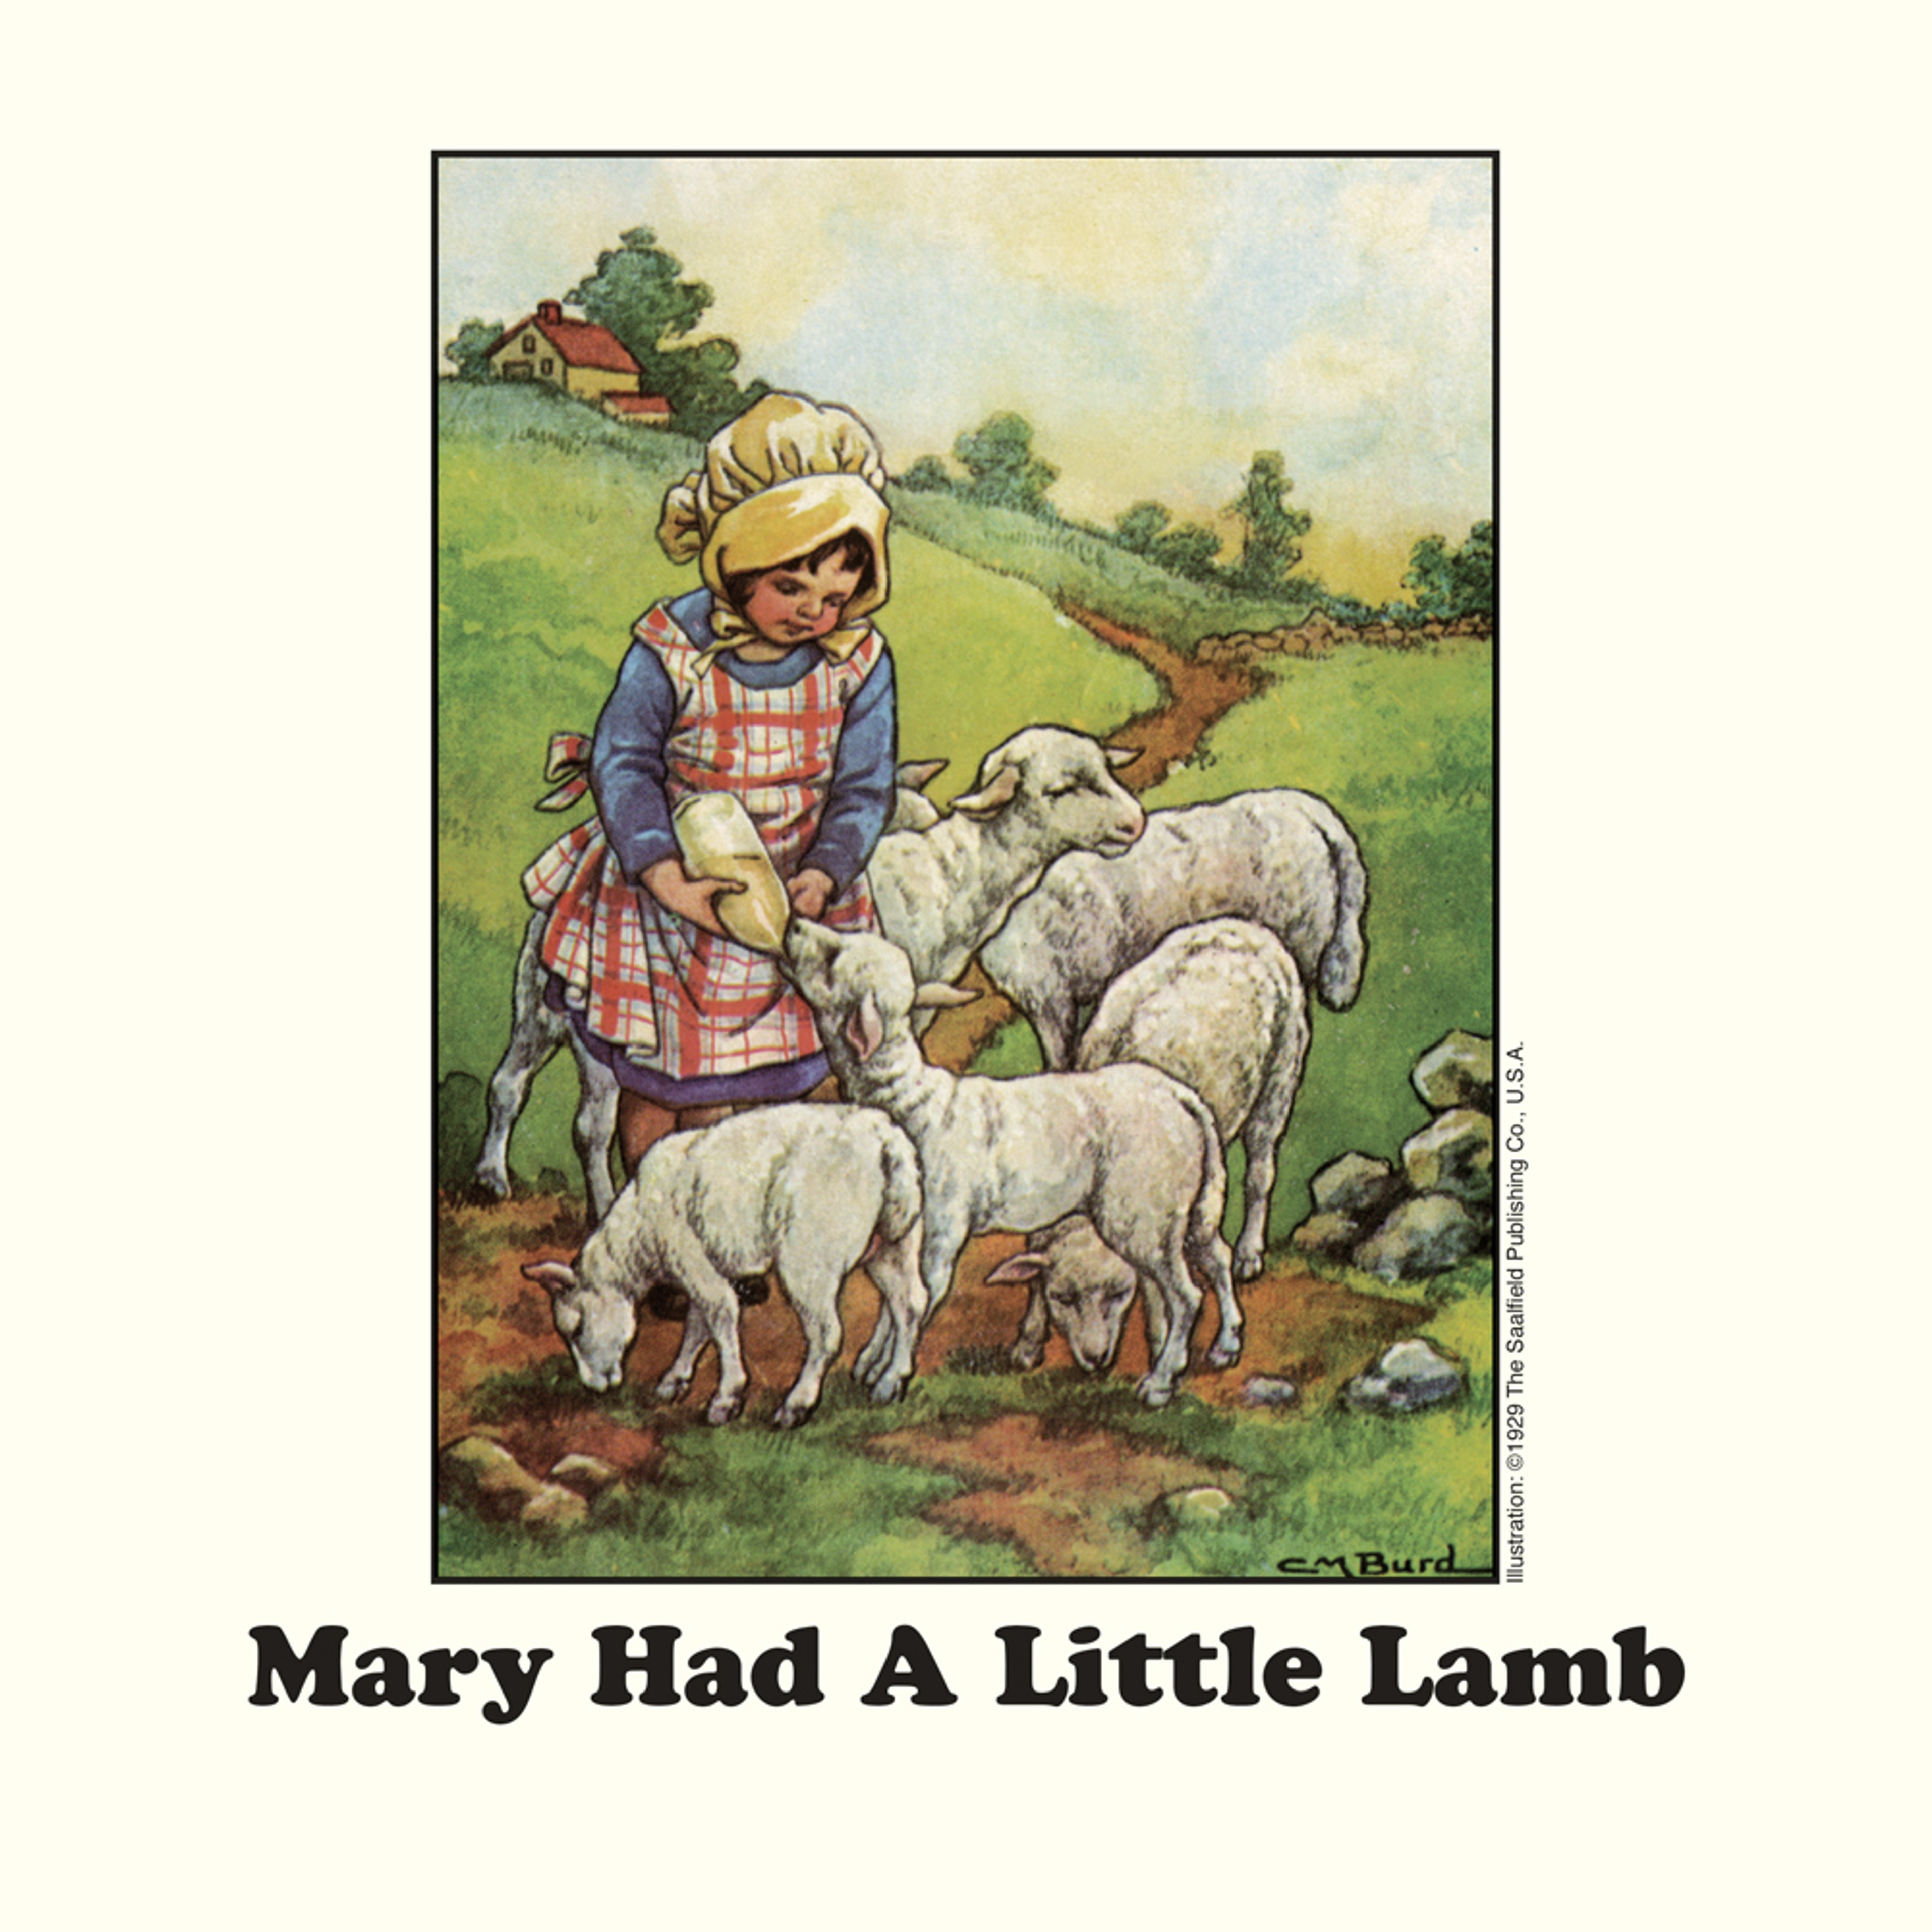 “Mary Had A Little Lamb” Single artwork as featured in 'The 7" Singles Box'